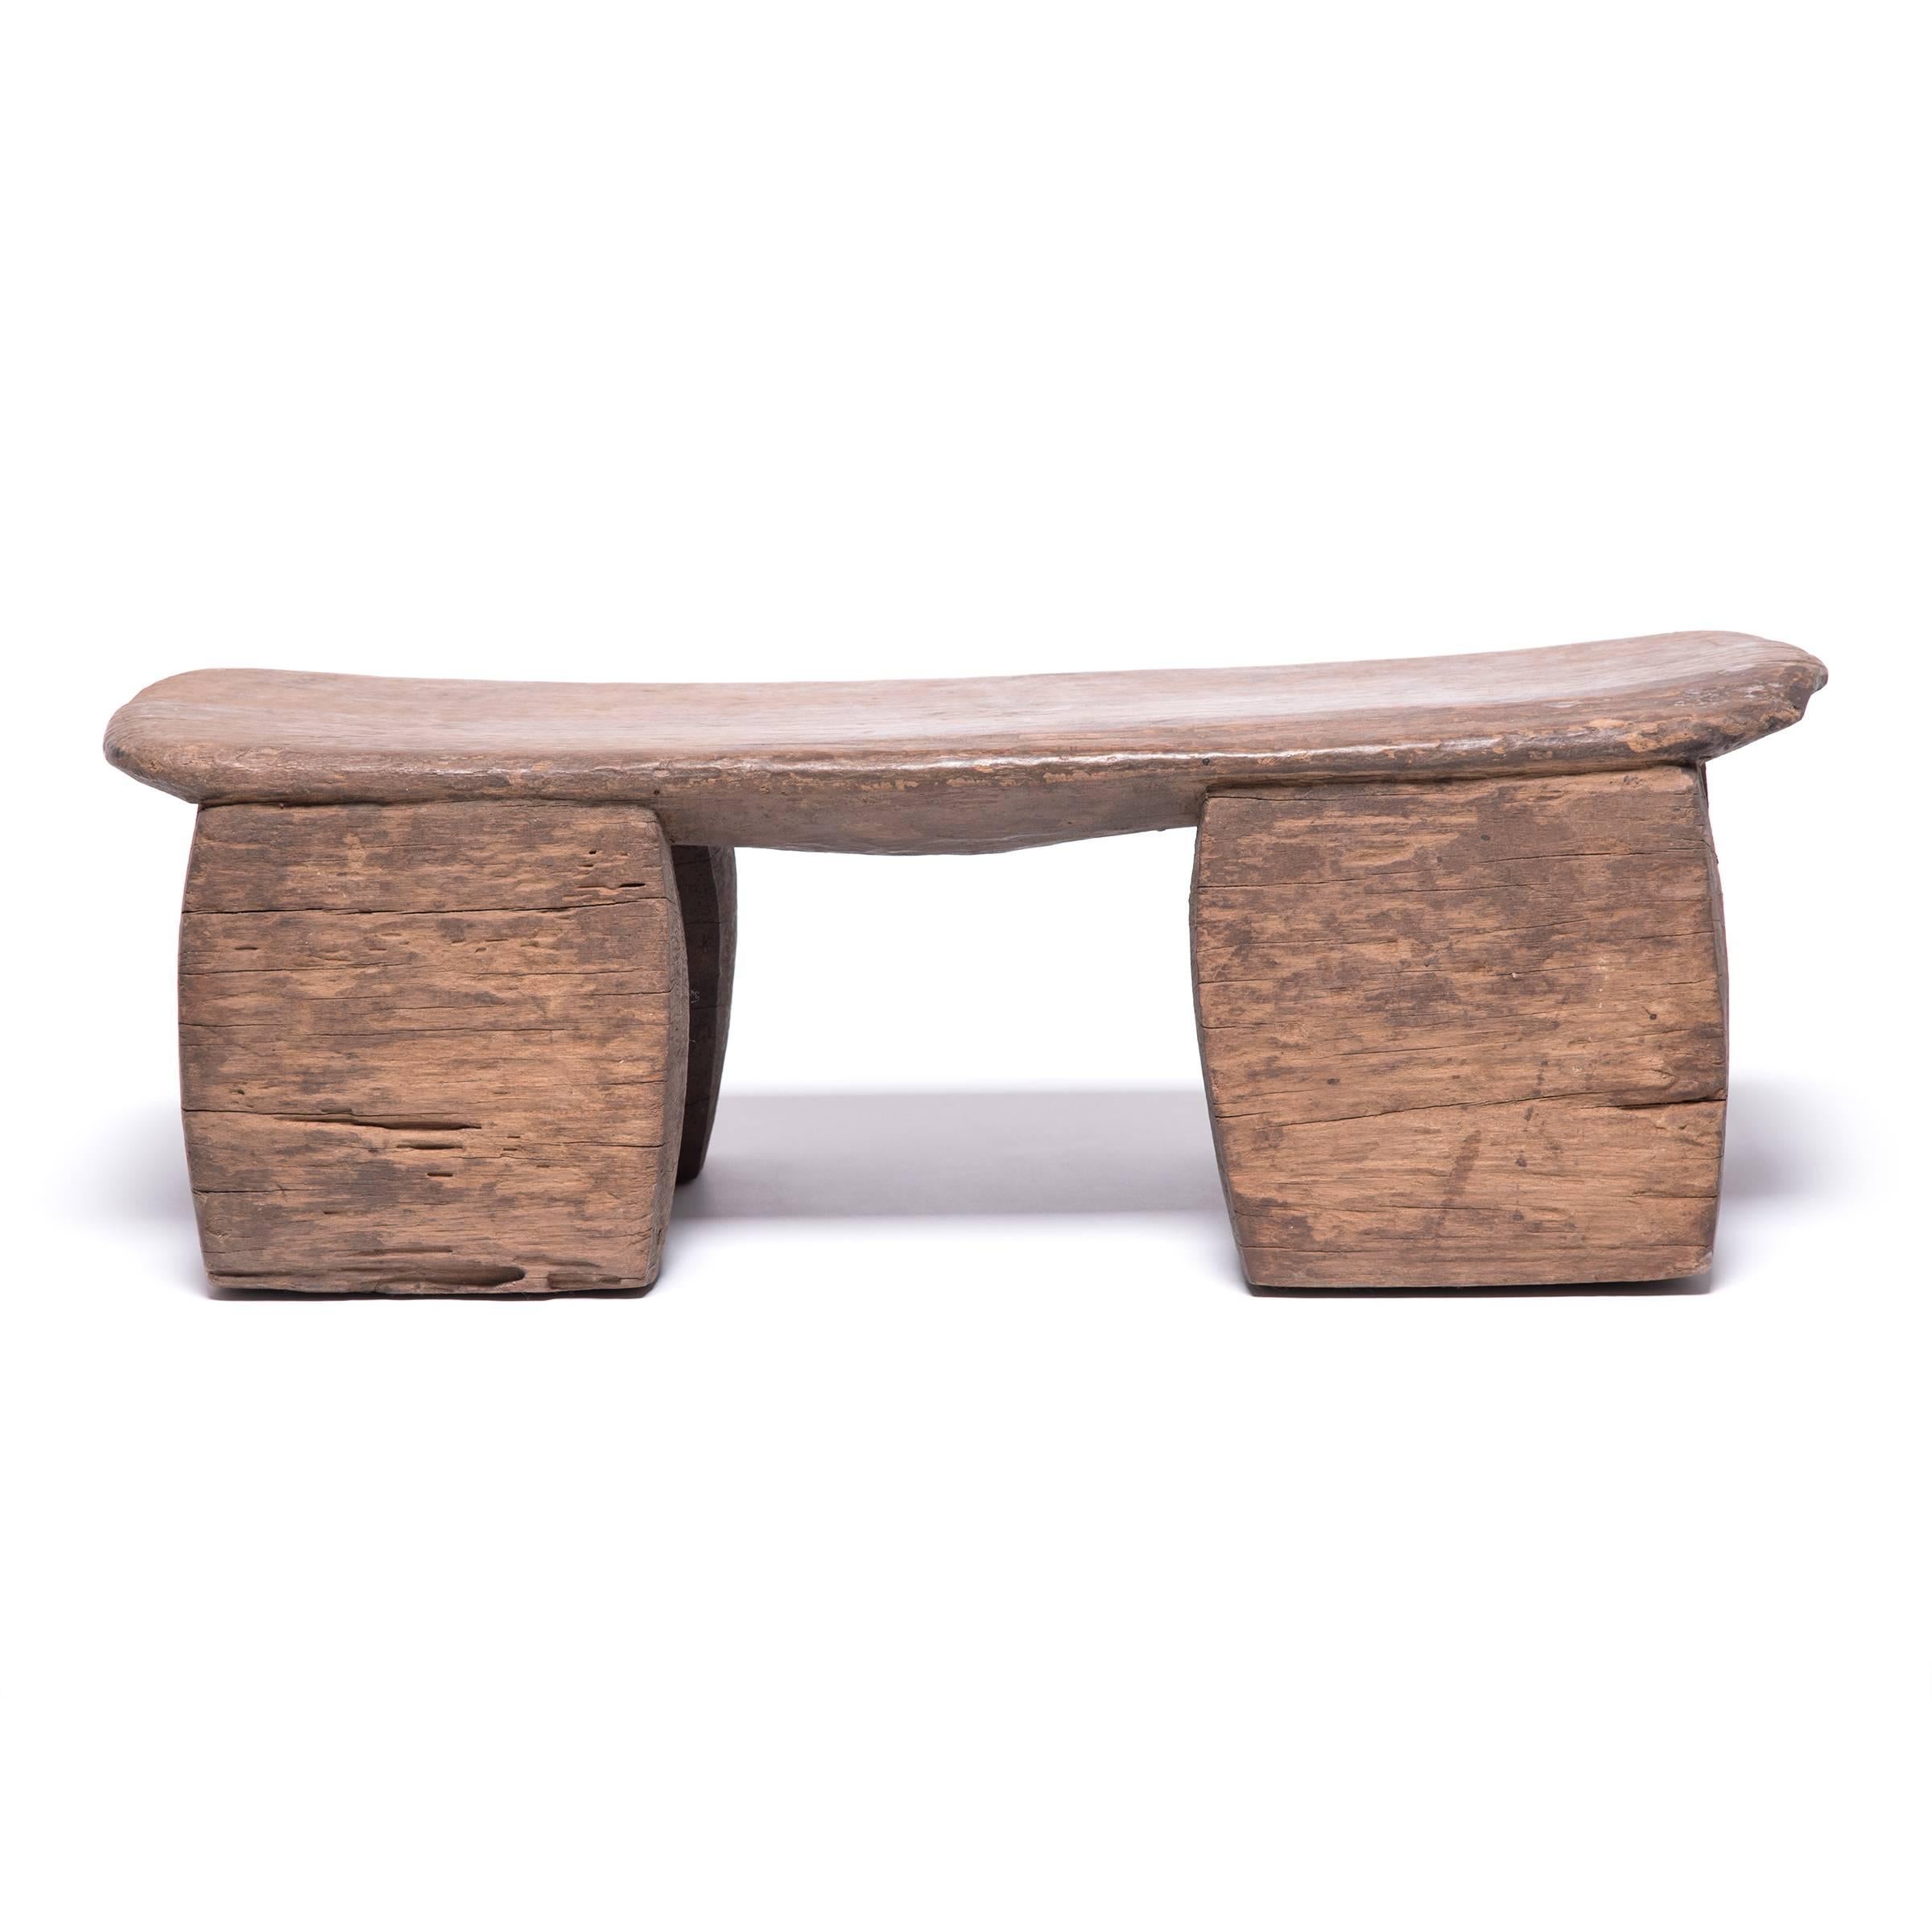 Hand-Carved Senufo Incised Stool from the Ivory Coast